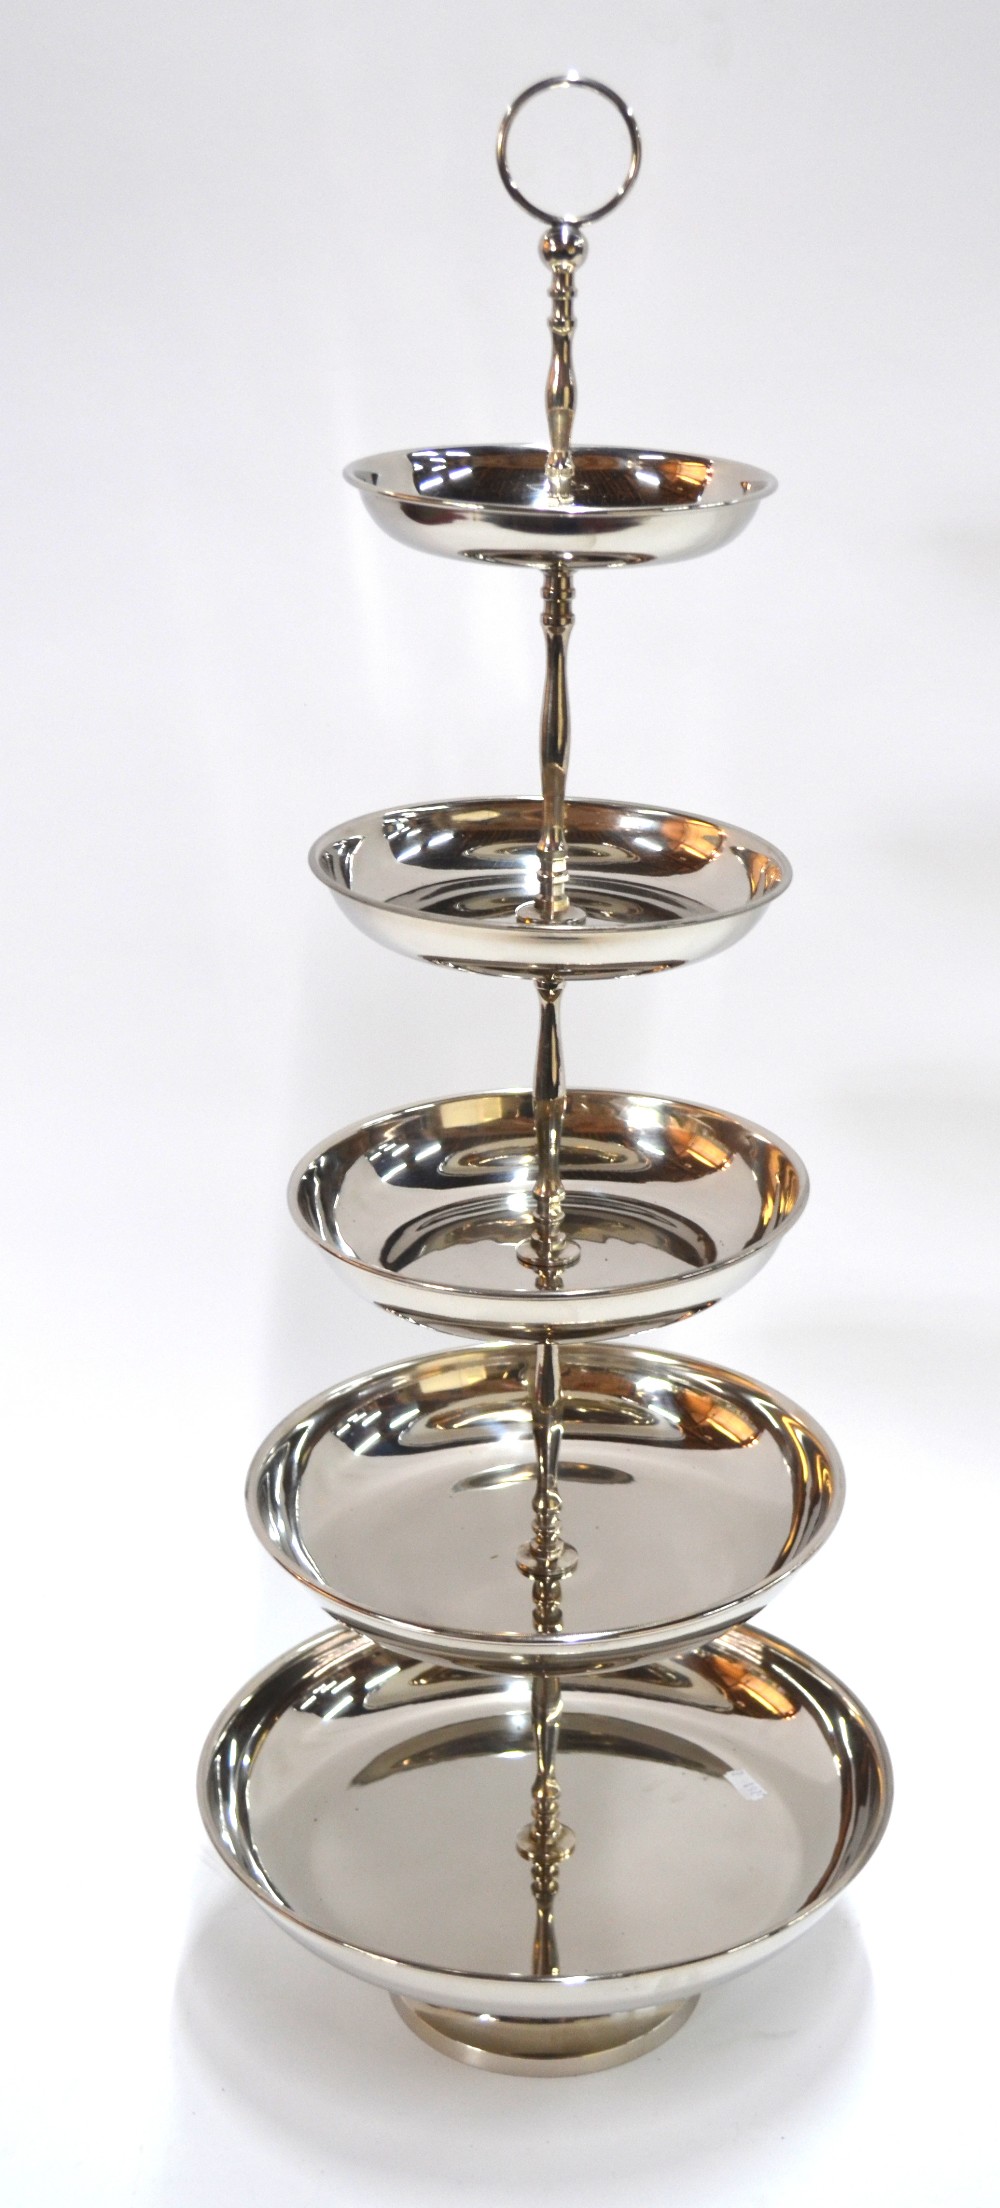 A nickel-plated 5-tier cake stand